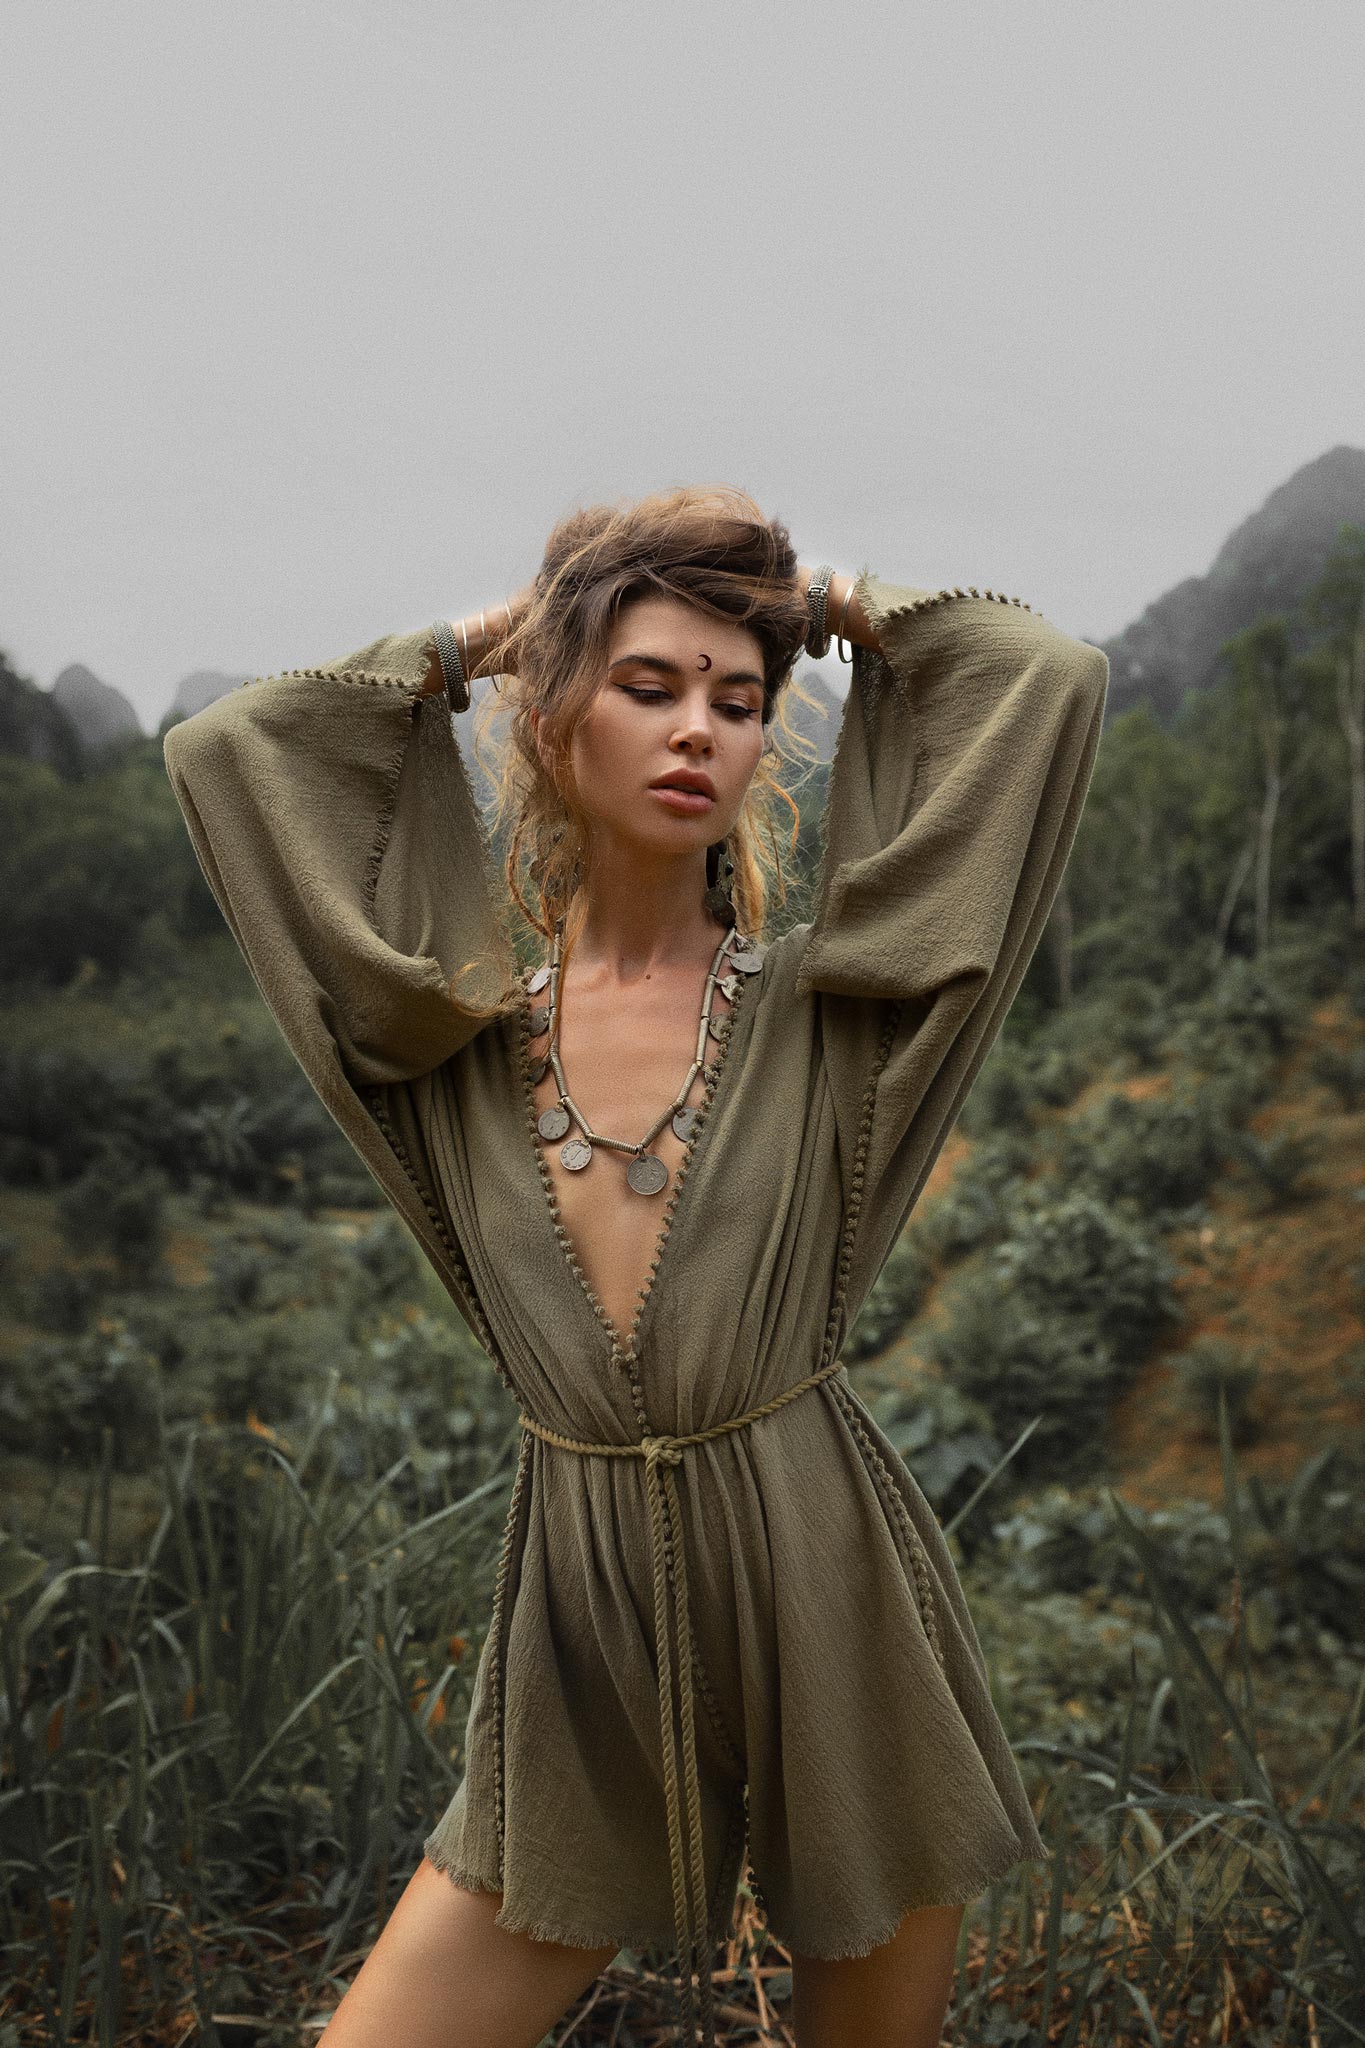 Boho Chic Sage Green Romper Dress - Versatile and Sustainable Fashion